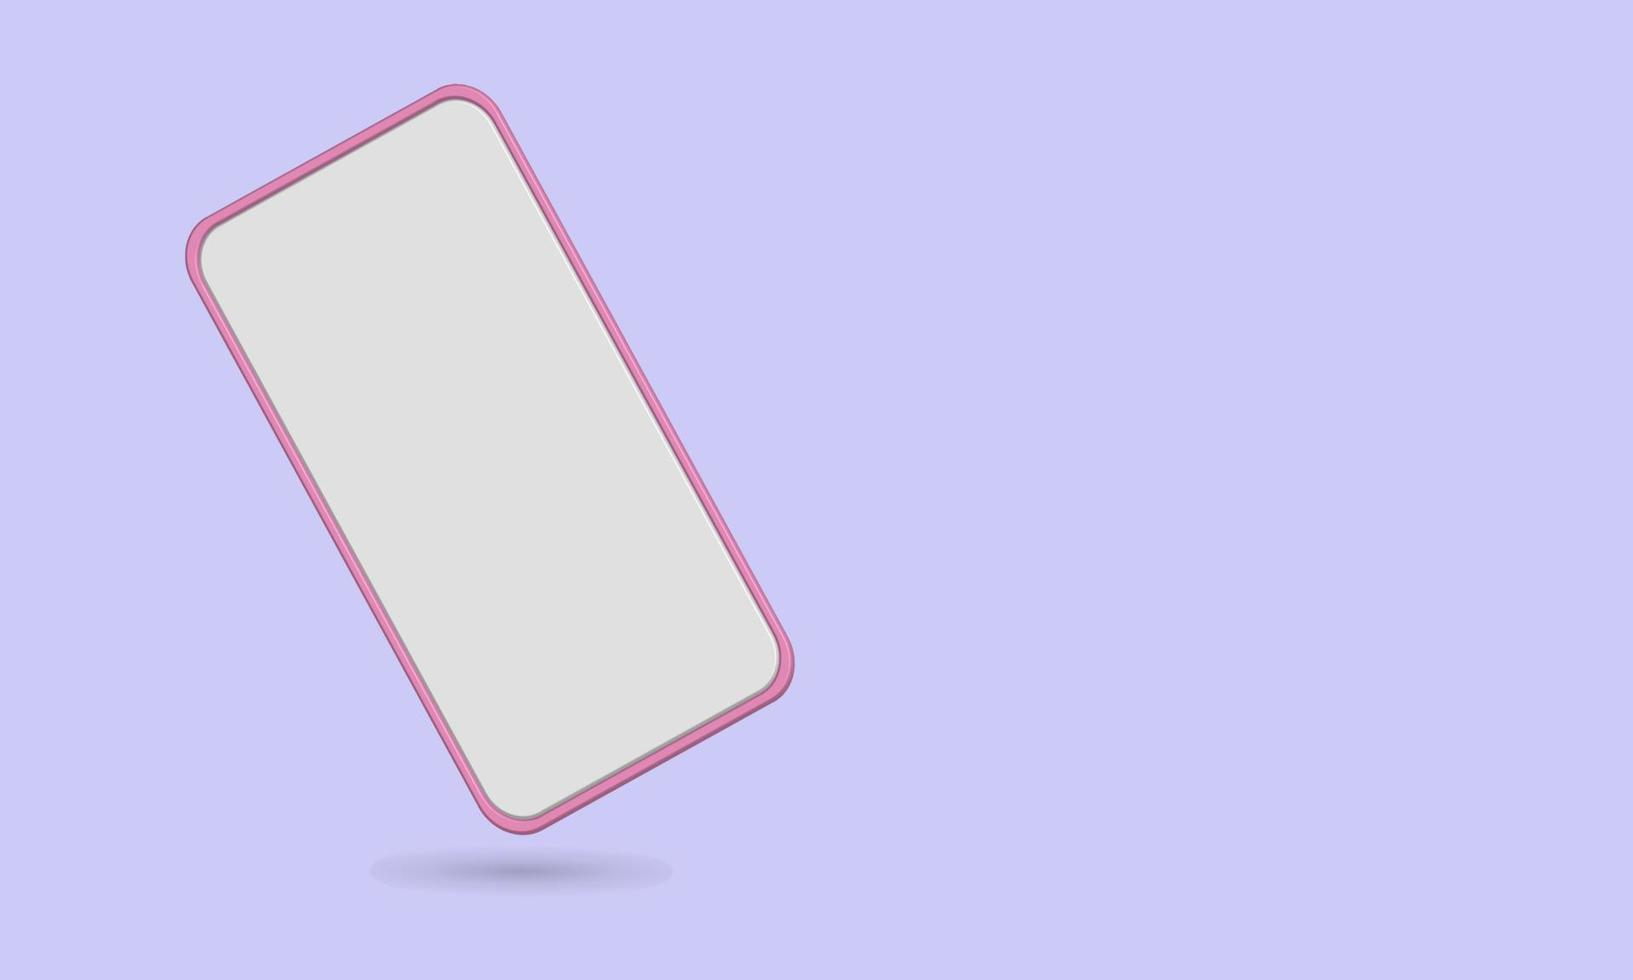 3D blank pink smartphone mock up cartoon vector illustration best for your property content